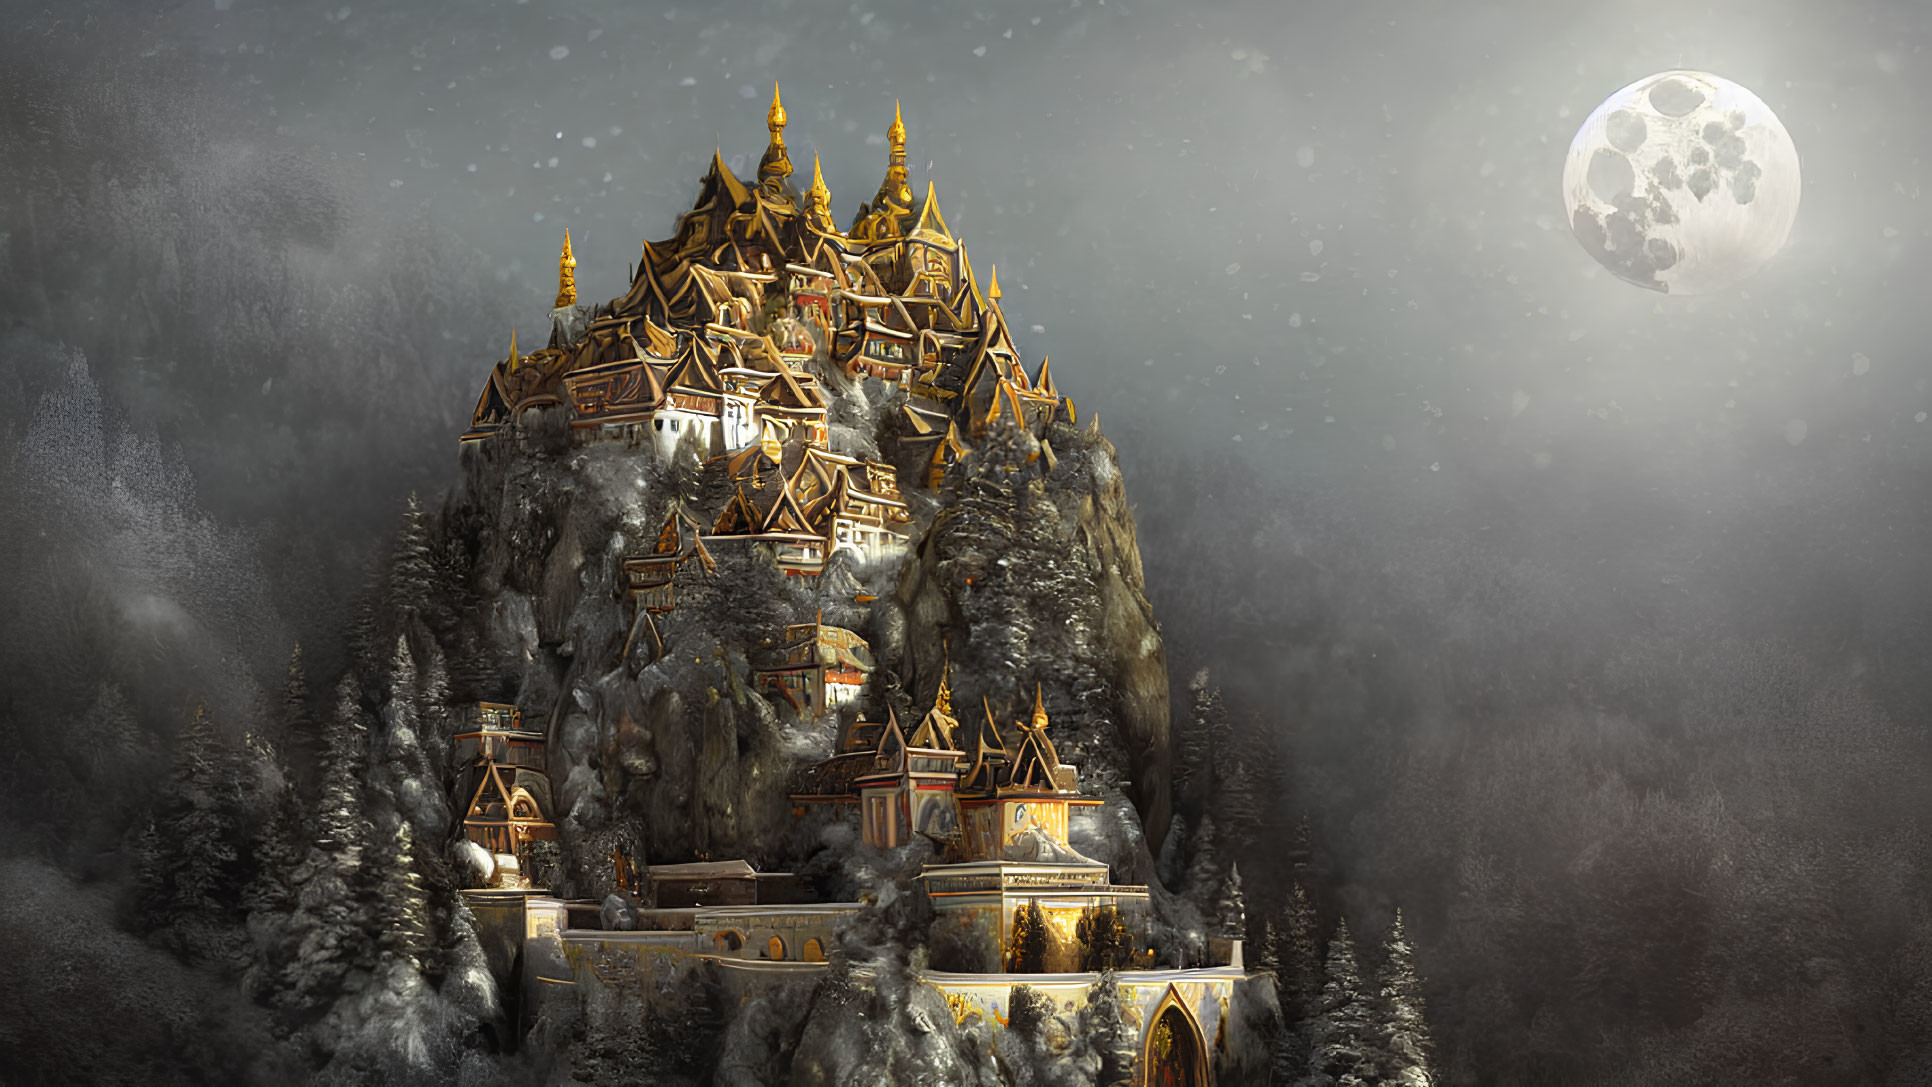 Golden-roofed palace on rugged mountain in moonlit snowy landscape